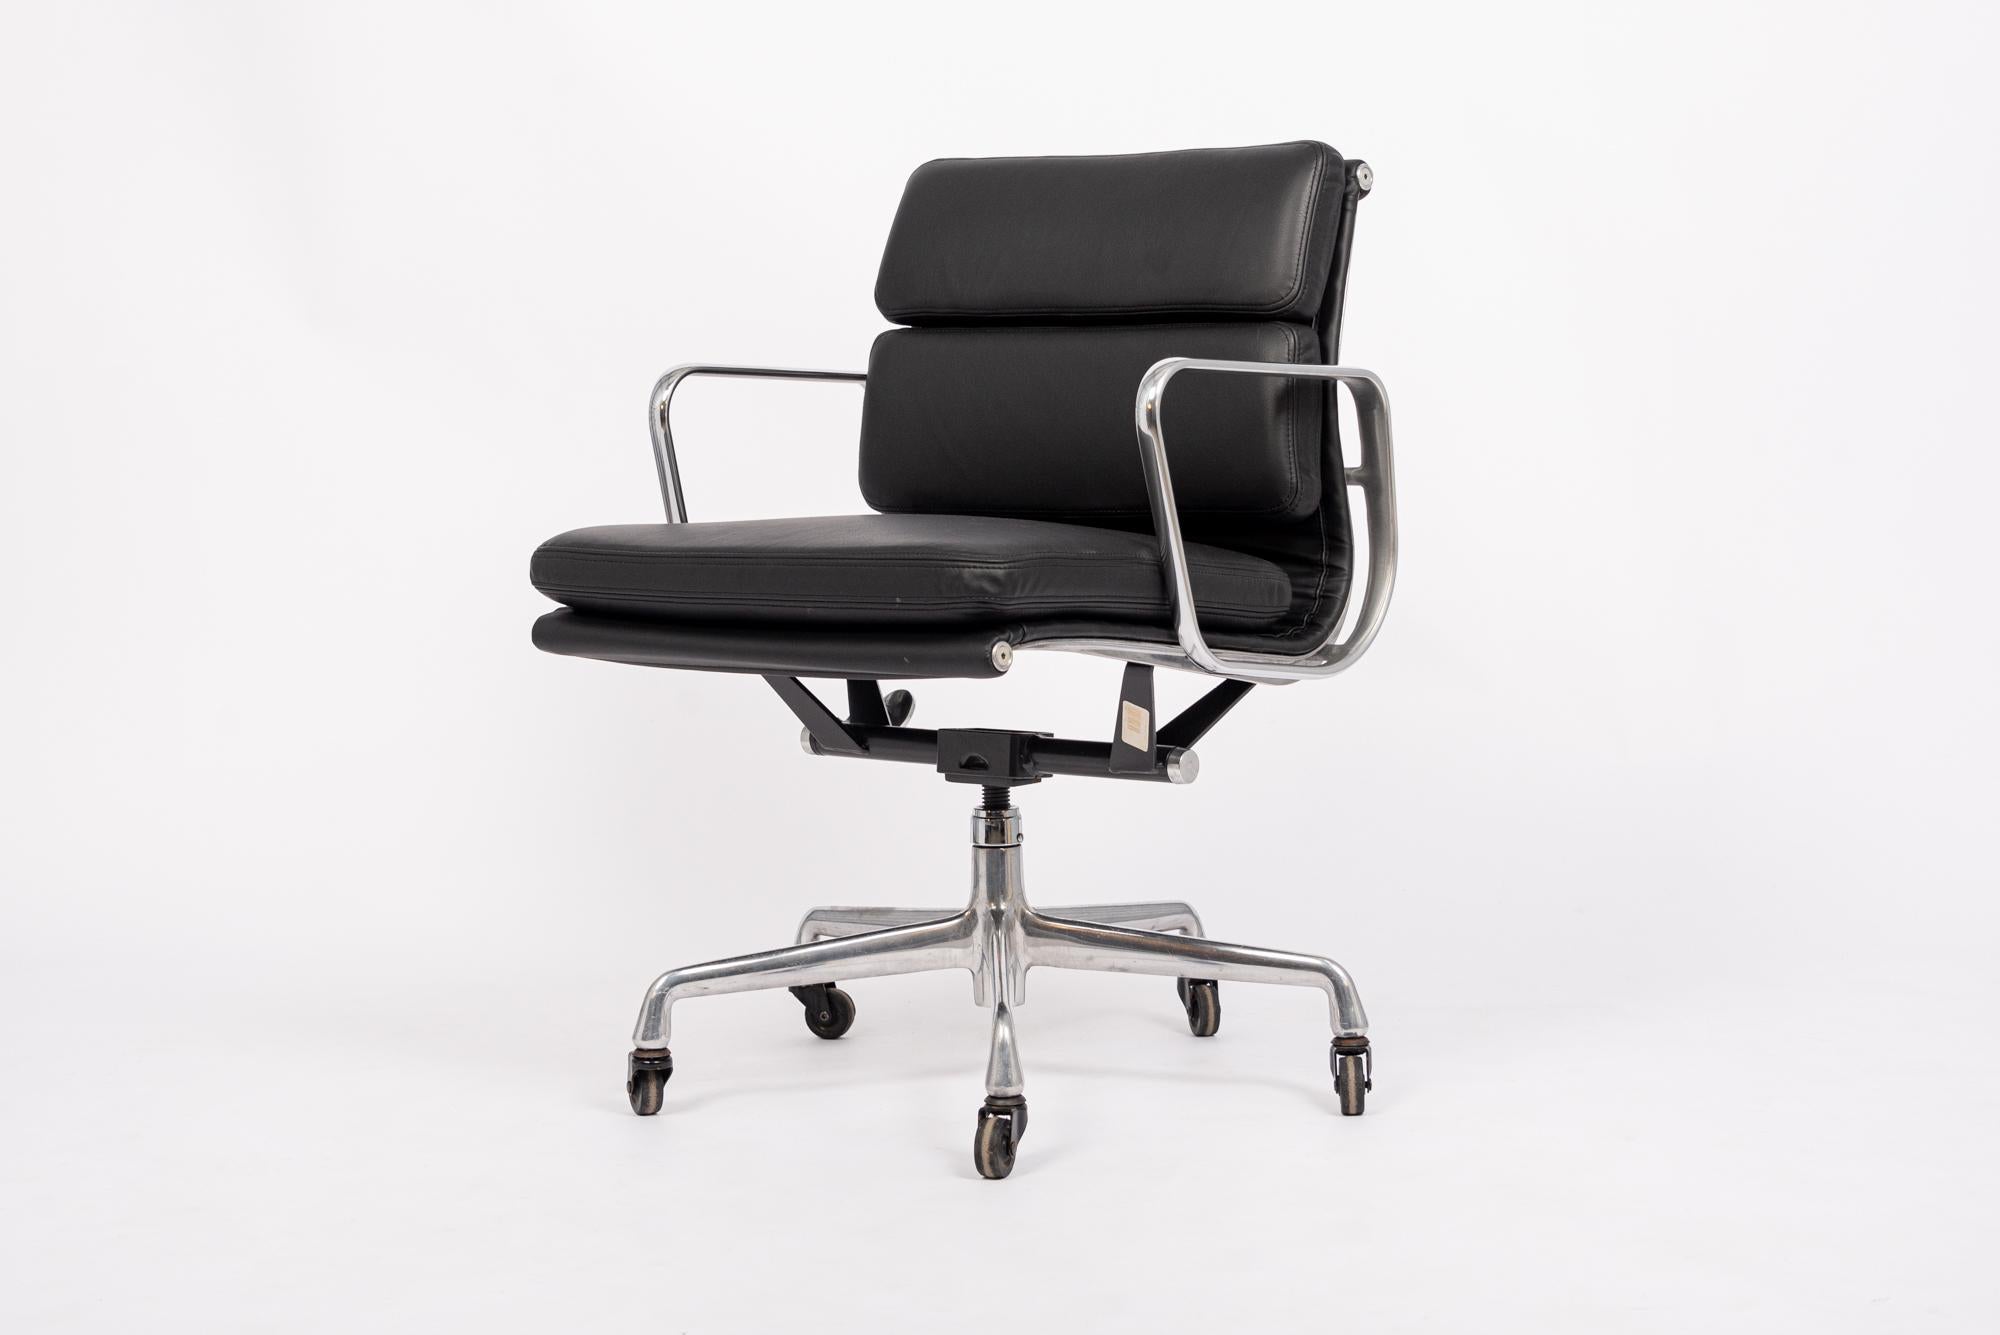 This authentic Eames for Herman Miller Soft Pad Management Height black leather office chair from the Aluminum Group Collection was manufactured in the 2000s. This classic mid century modern office chair was first introduced in 1969 by Charles and